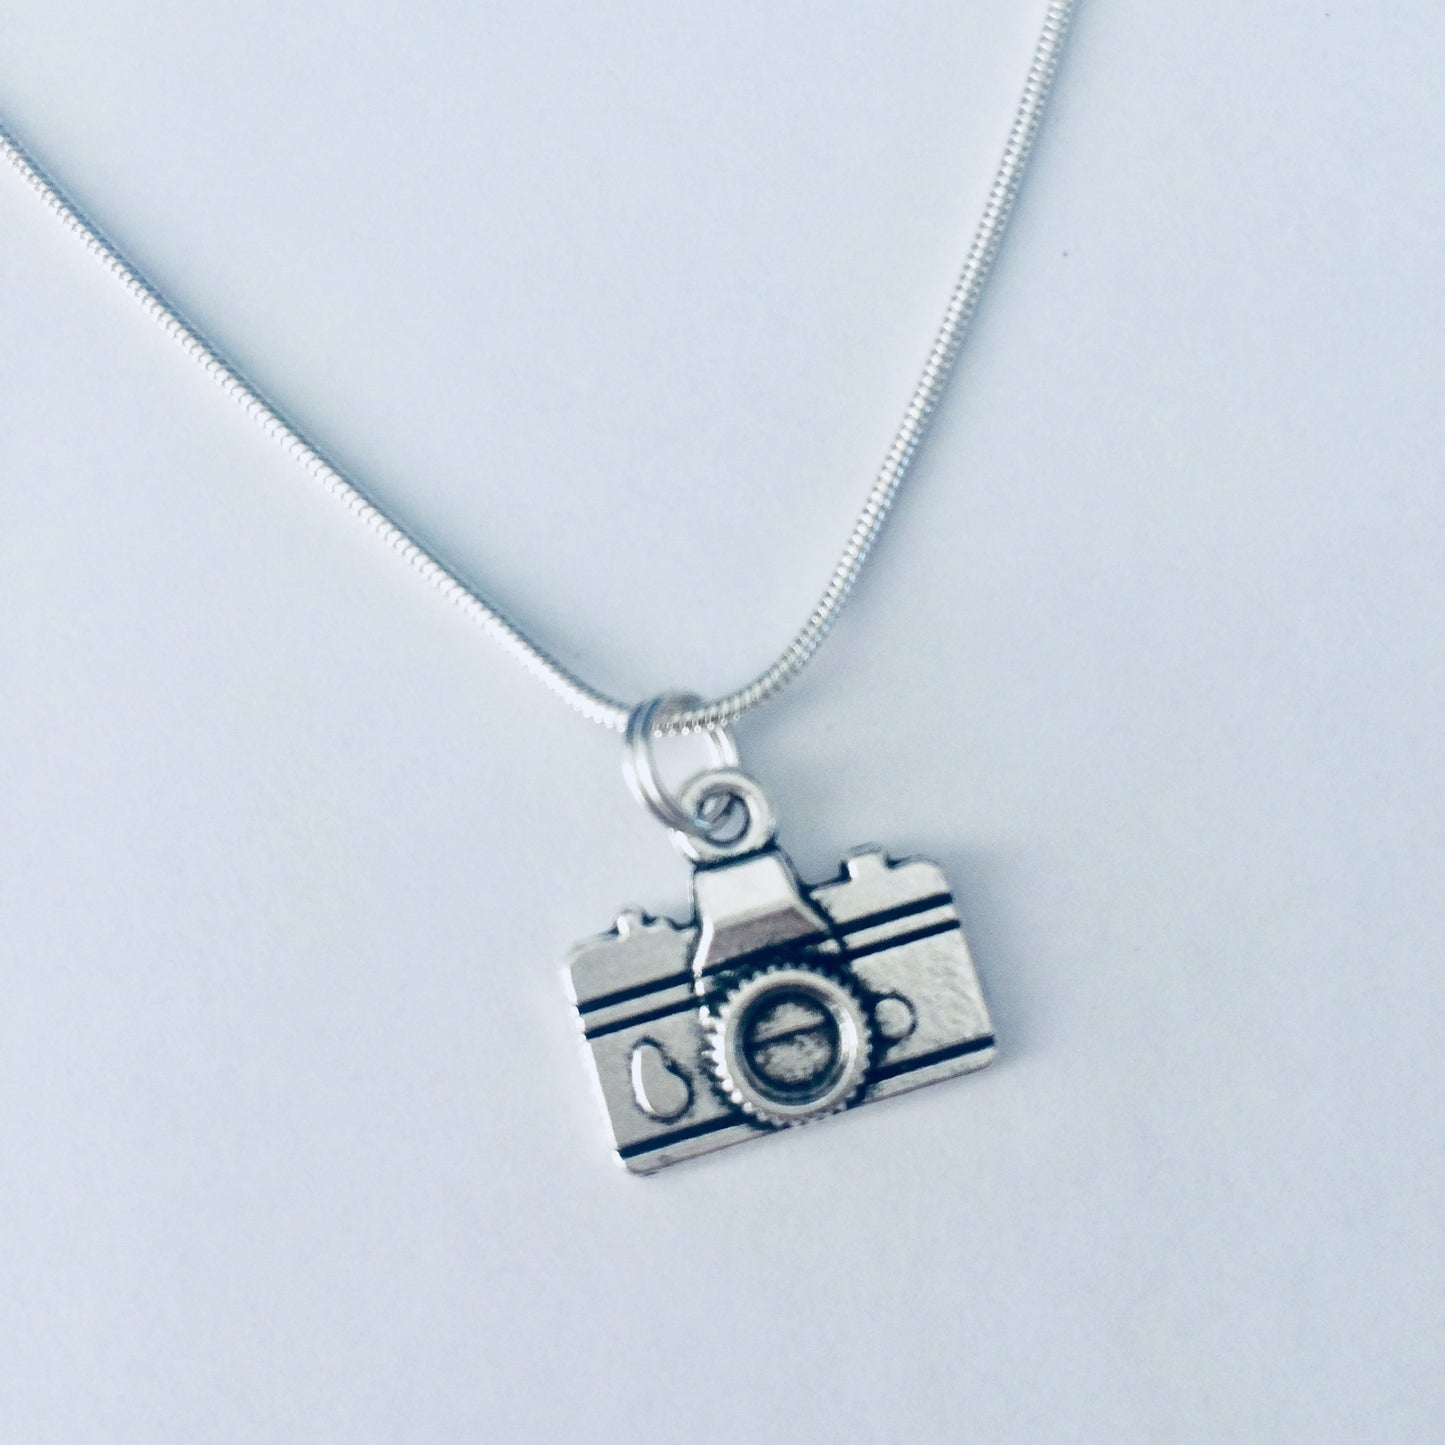 Camera Necklace, Photography Lover, Photographer Jewelry, Photographer Jewellery, Wedding Photographer Gift, Travel Jewellery, Camera